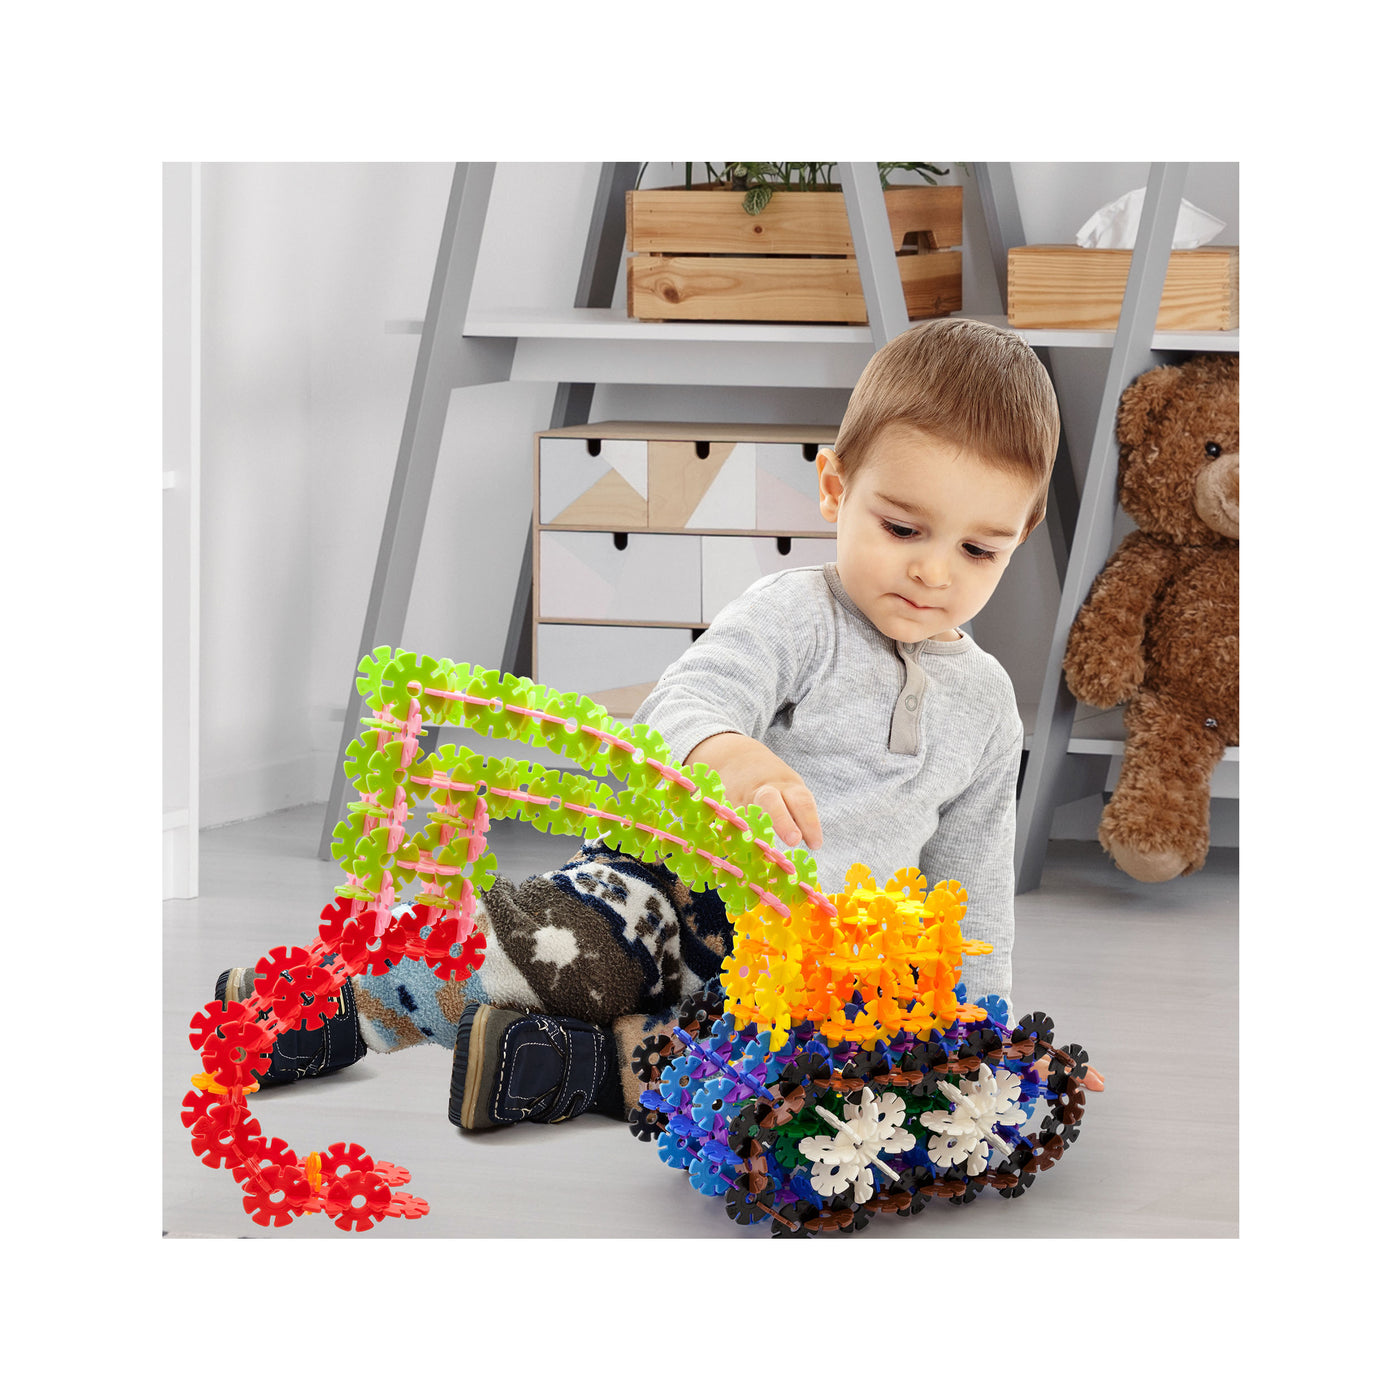 EverPlay 550 Piece Building Construction Toy Interlocking Chips